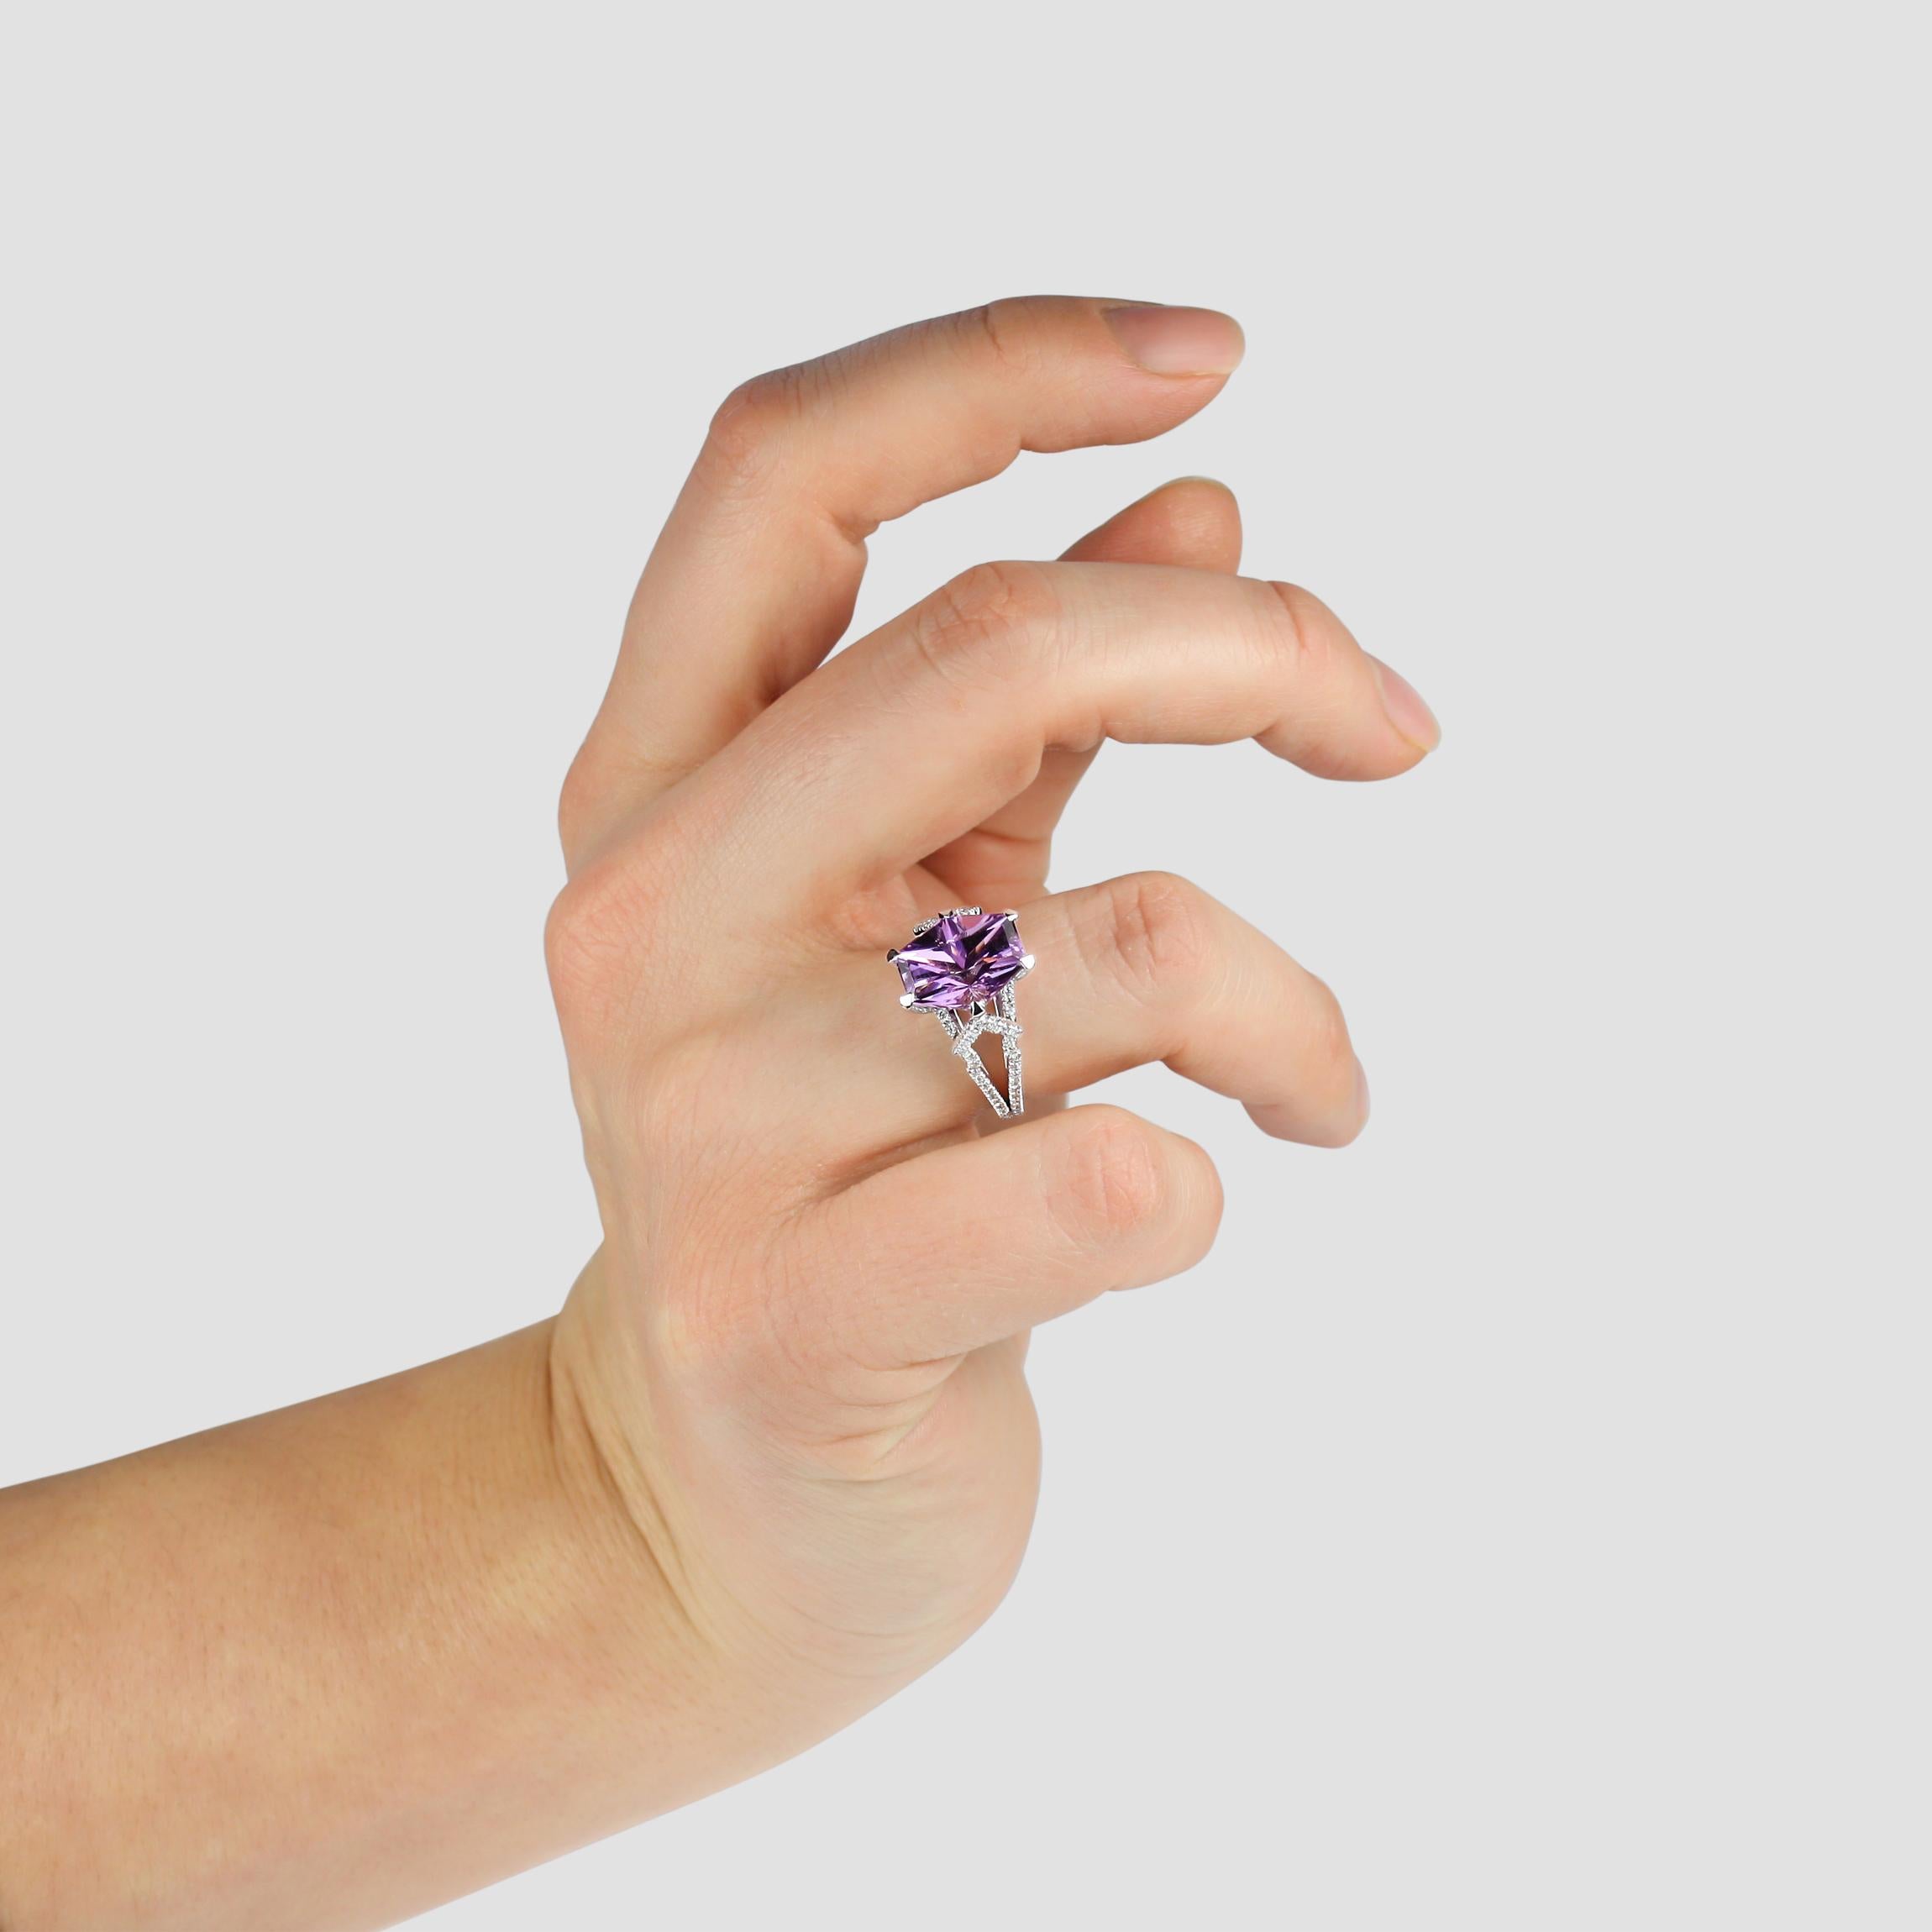 Modern Kata Asteria Ring Bespoke 2.78Carat Amethyst with Diamonds Cocktail Fashion Ring For Sale